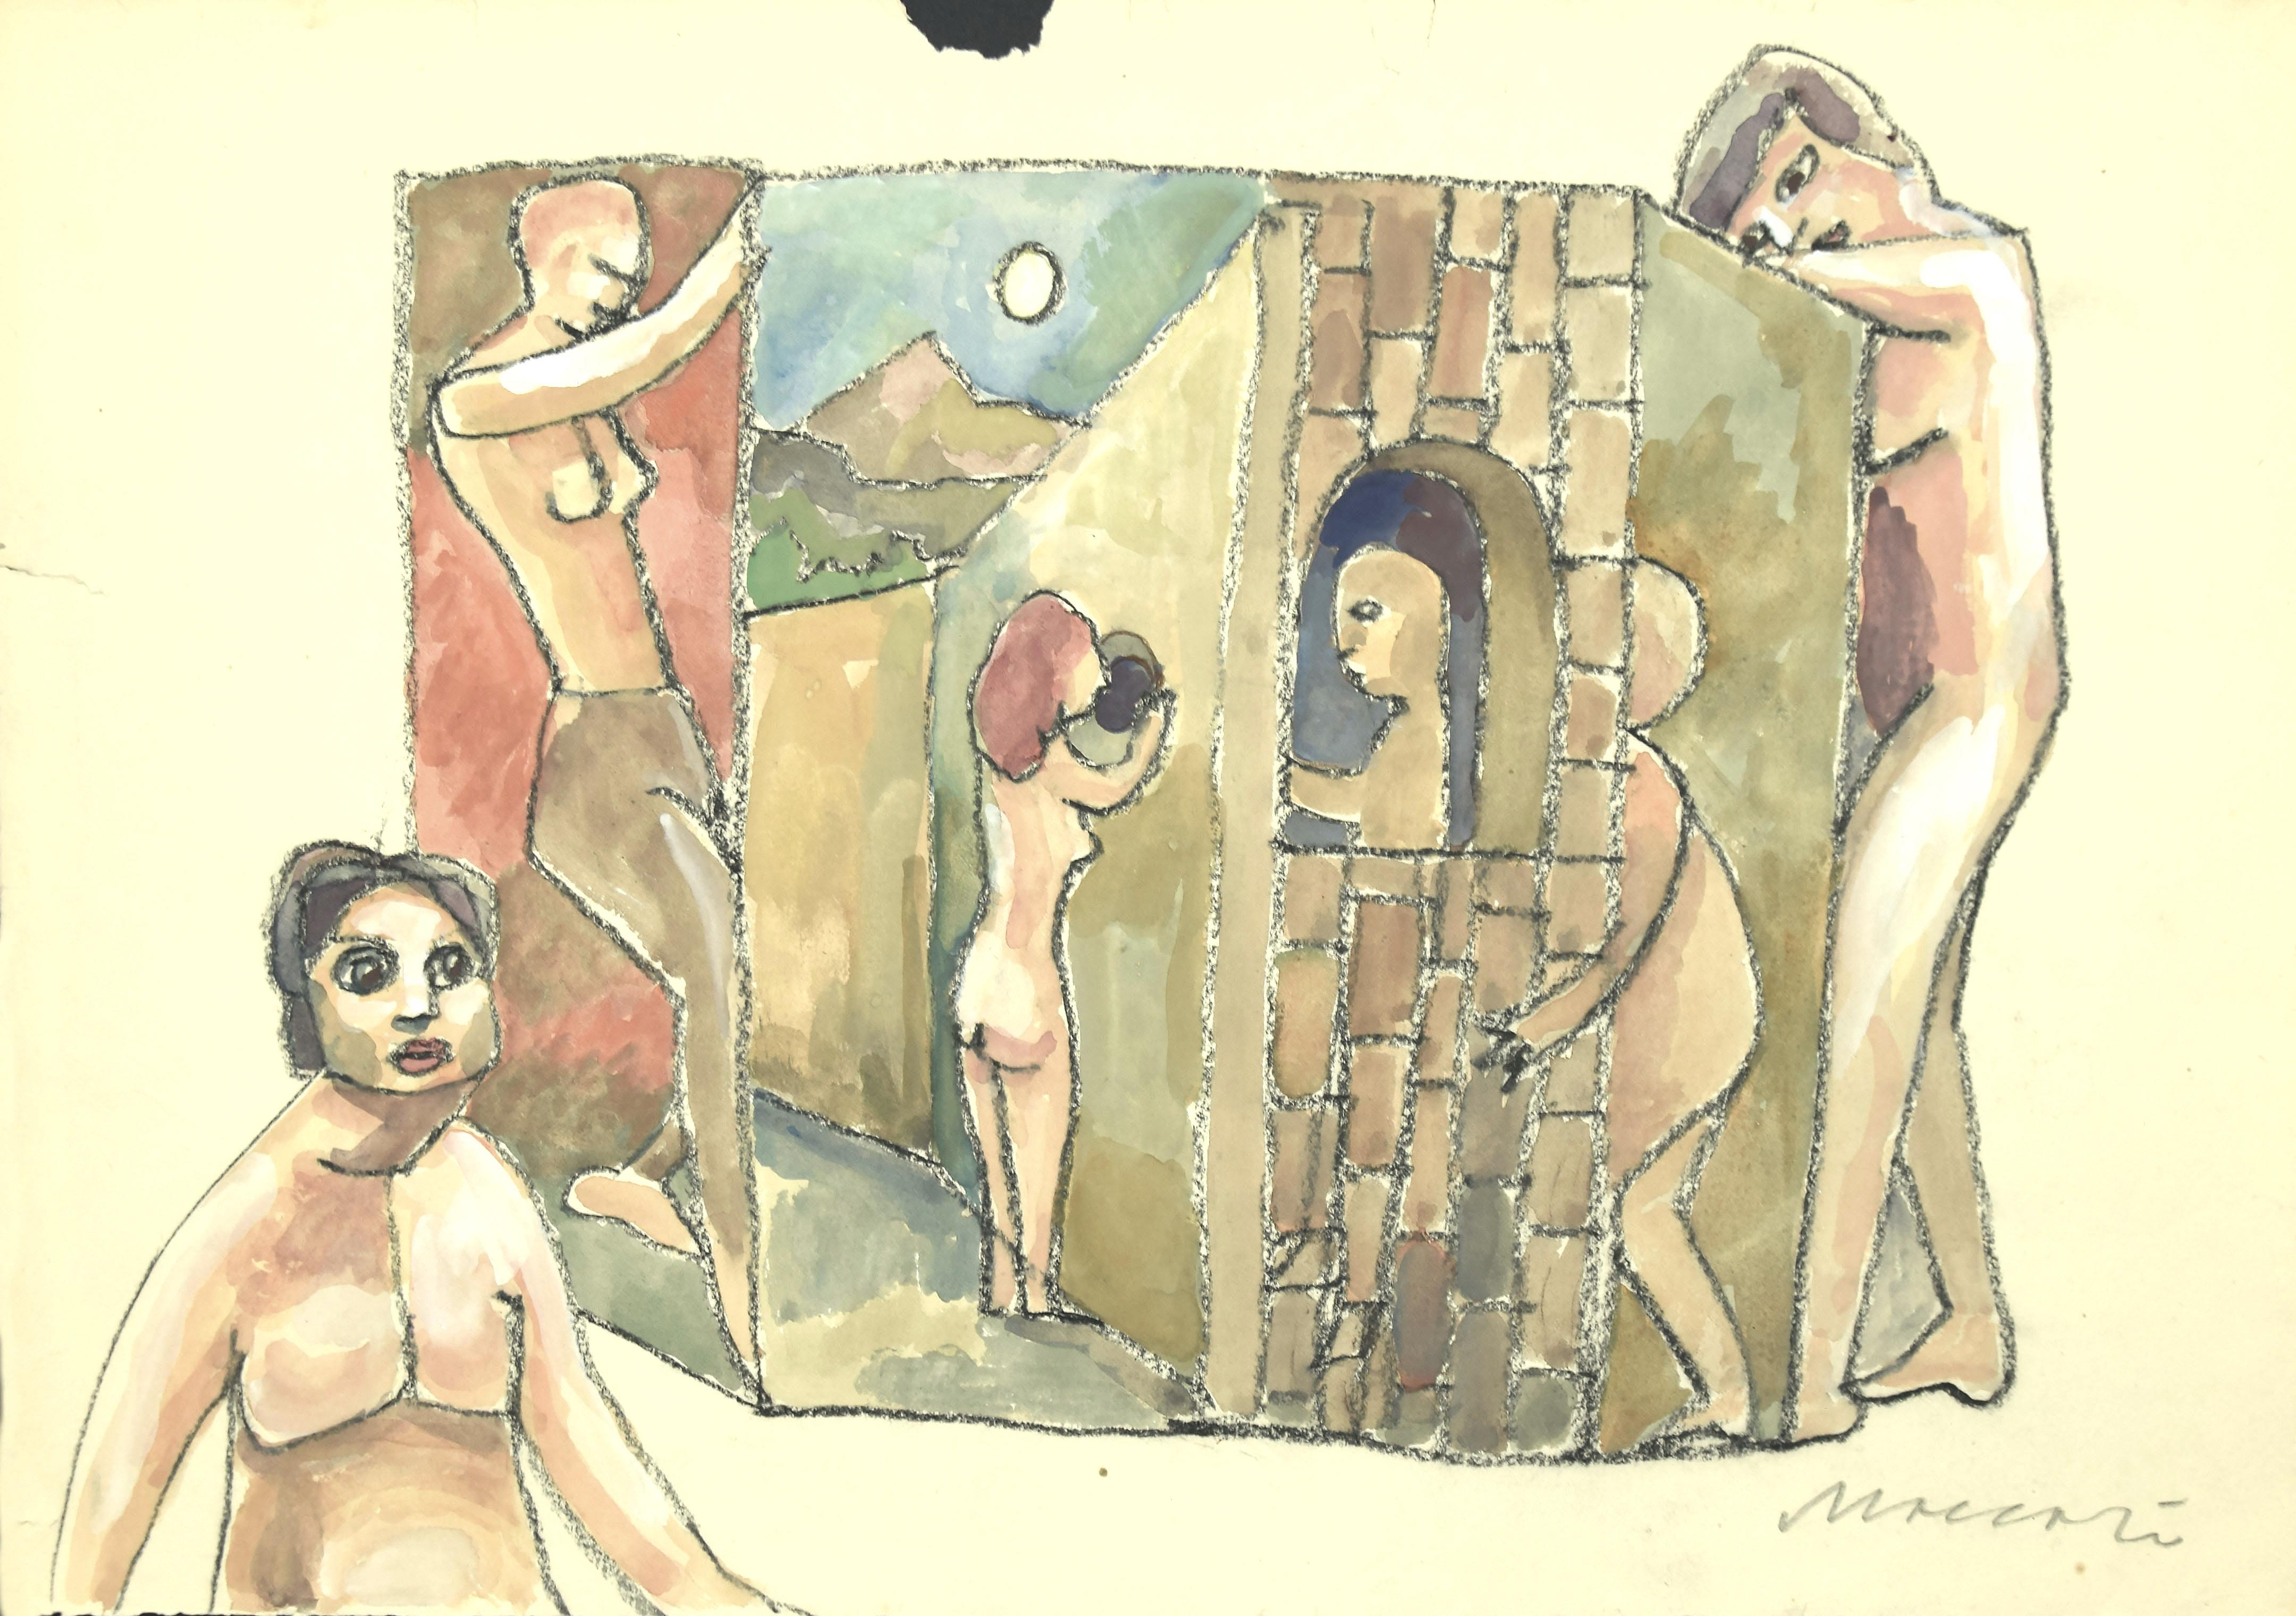 "The House under Constrution"  is an original hand colored drawing in charcoal and watercolor on ivory-colorated paper by Mino Maccari (1898-1989).
In good conditions: only small tear at the top on the edges of the work.

Sheet dimension: 35 x 50